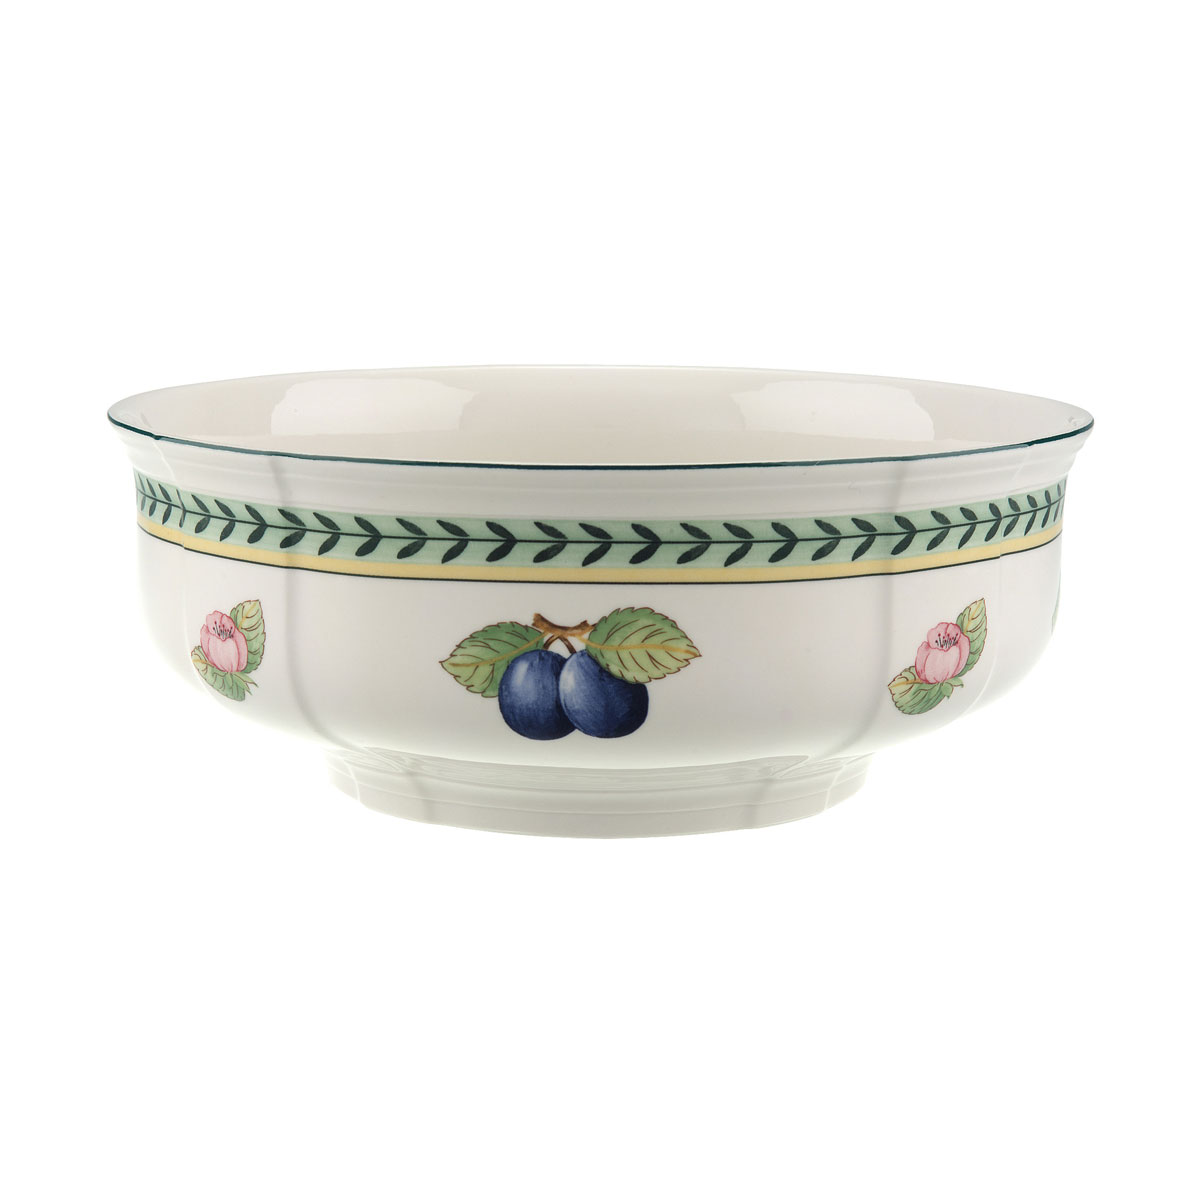 Villeroy and Boch French Garden Fleurence Round Vegetable Bowl 9.75"